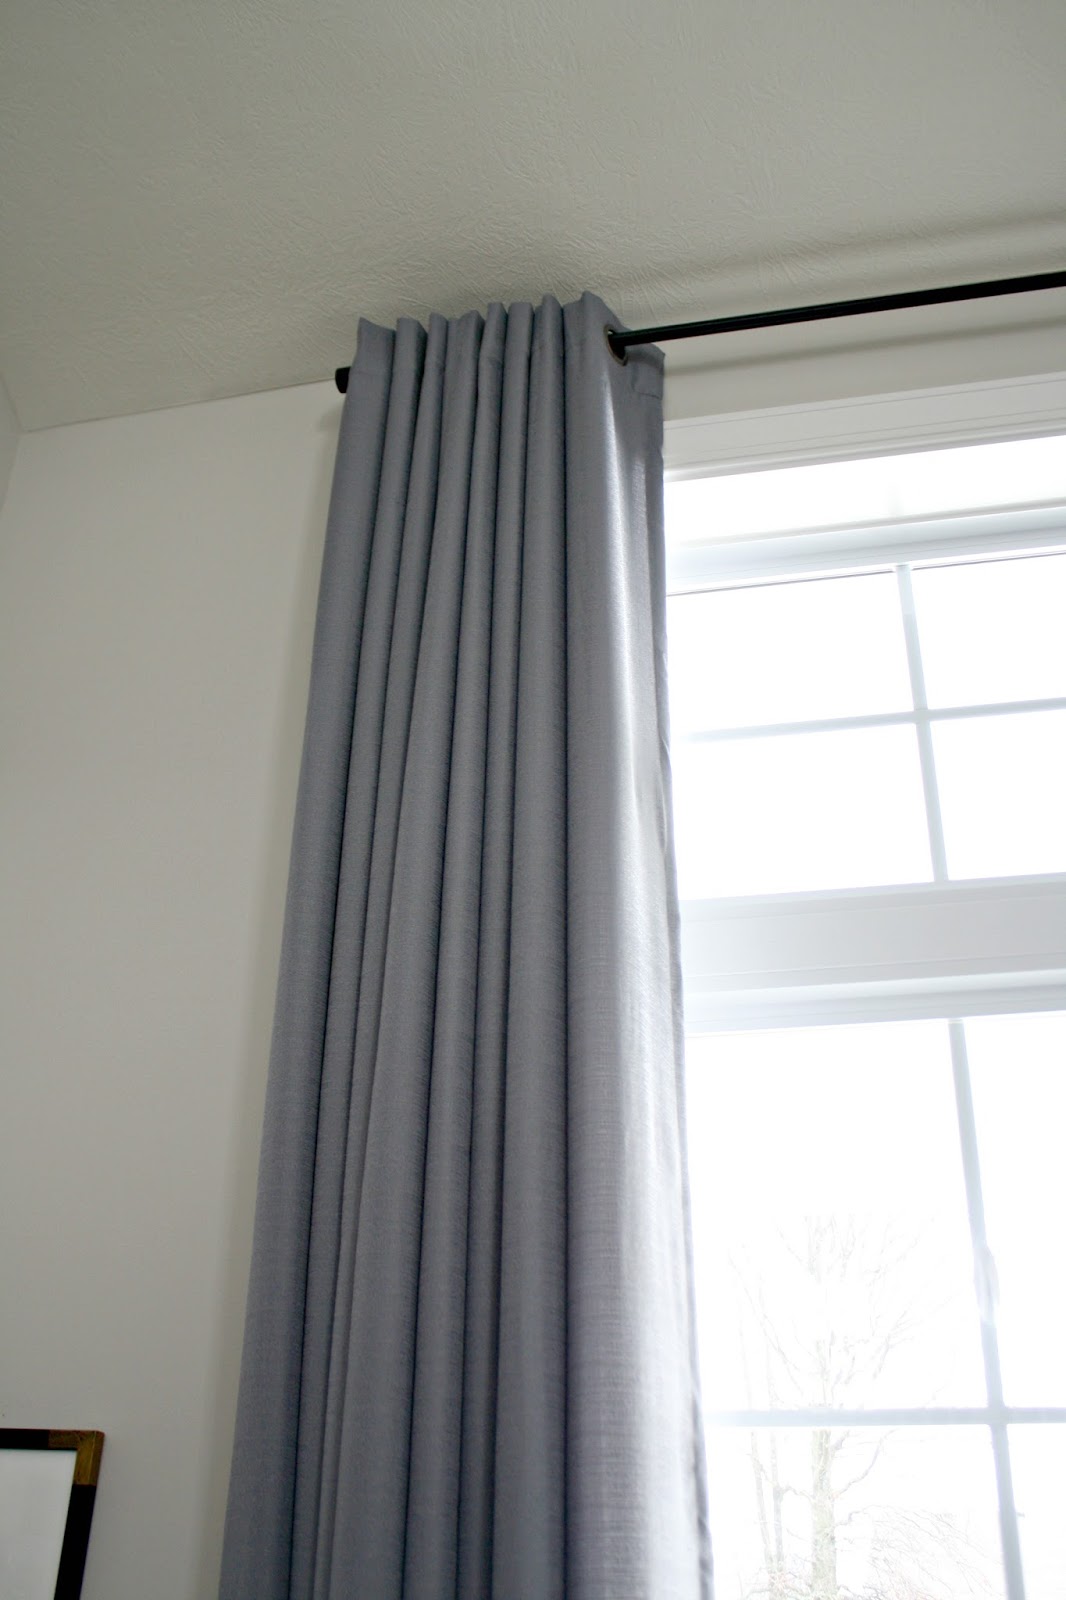 Thrifty Decor, 132 Inch Wide Curtains